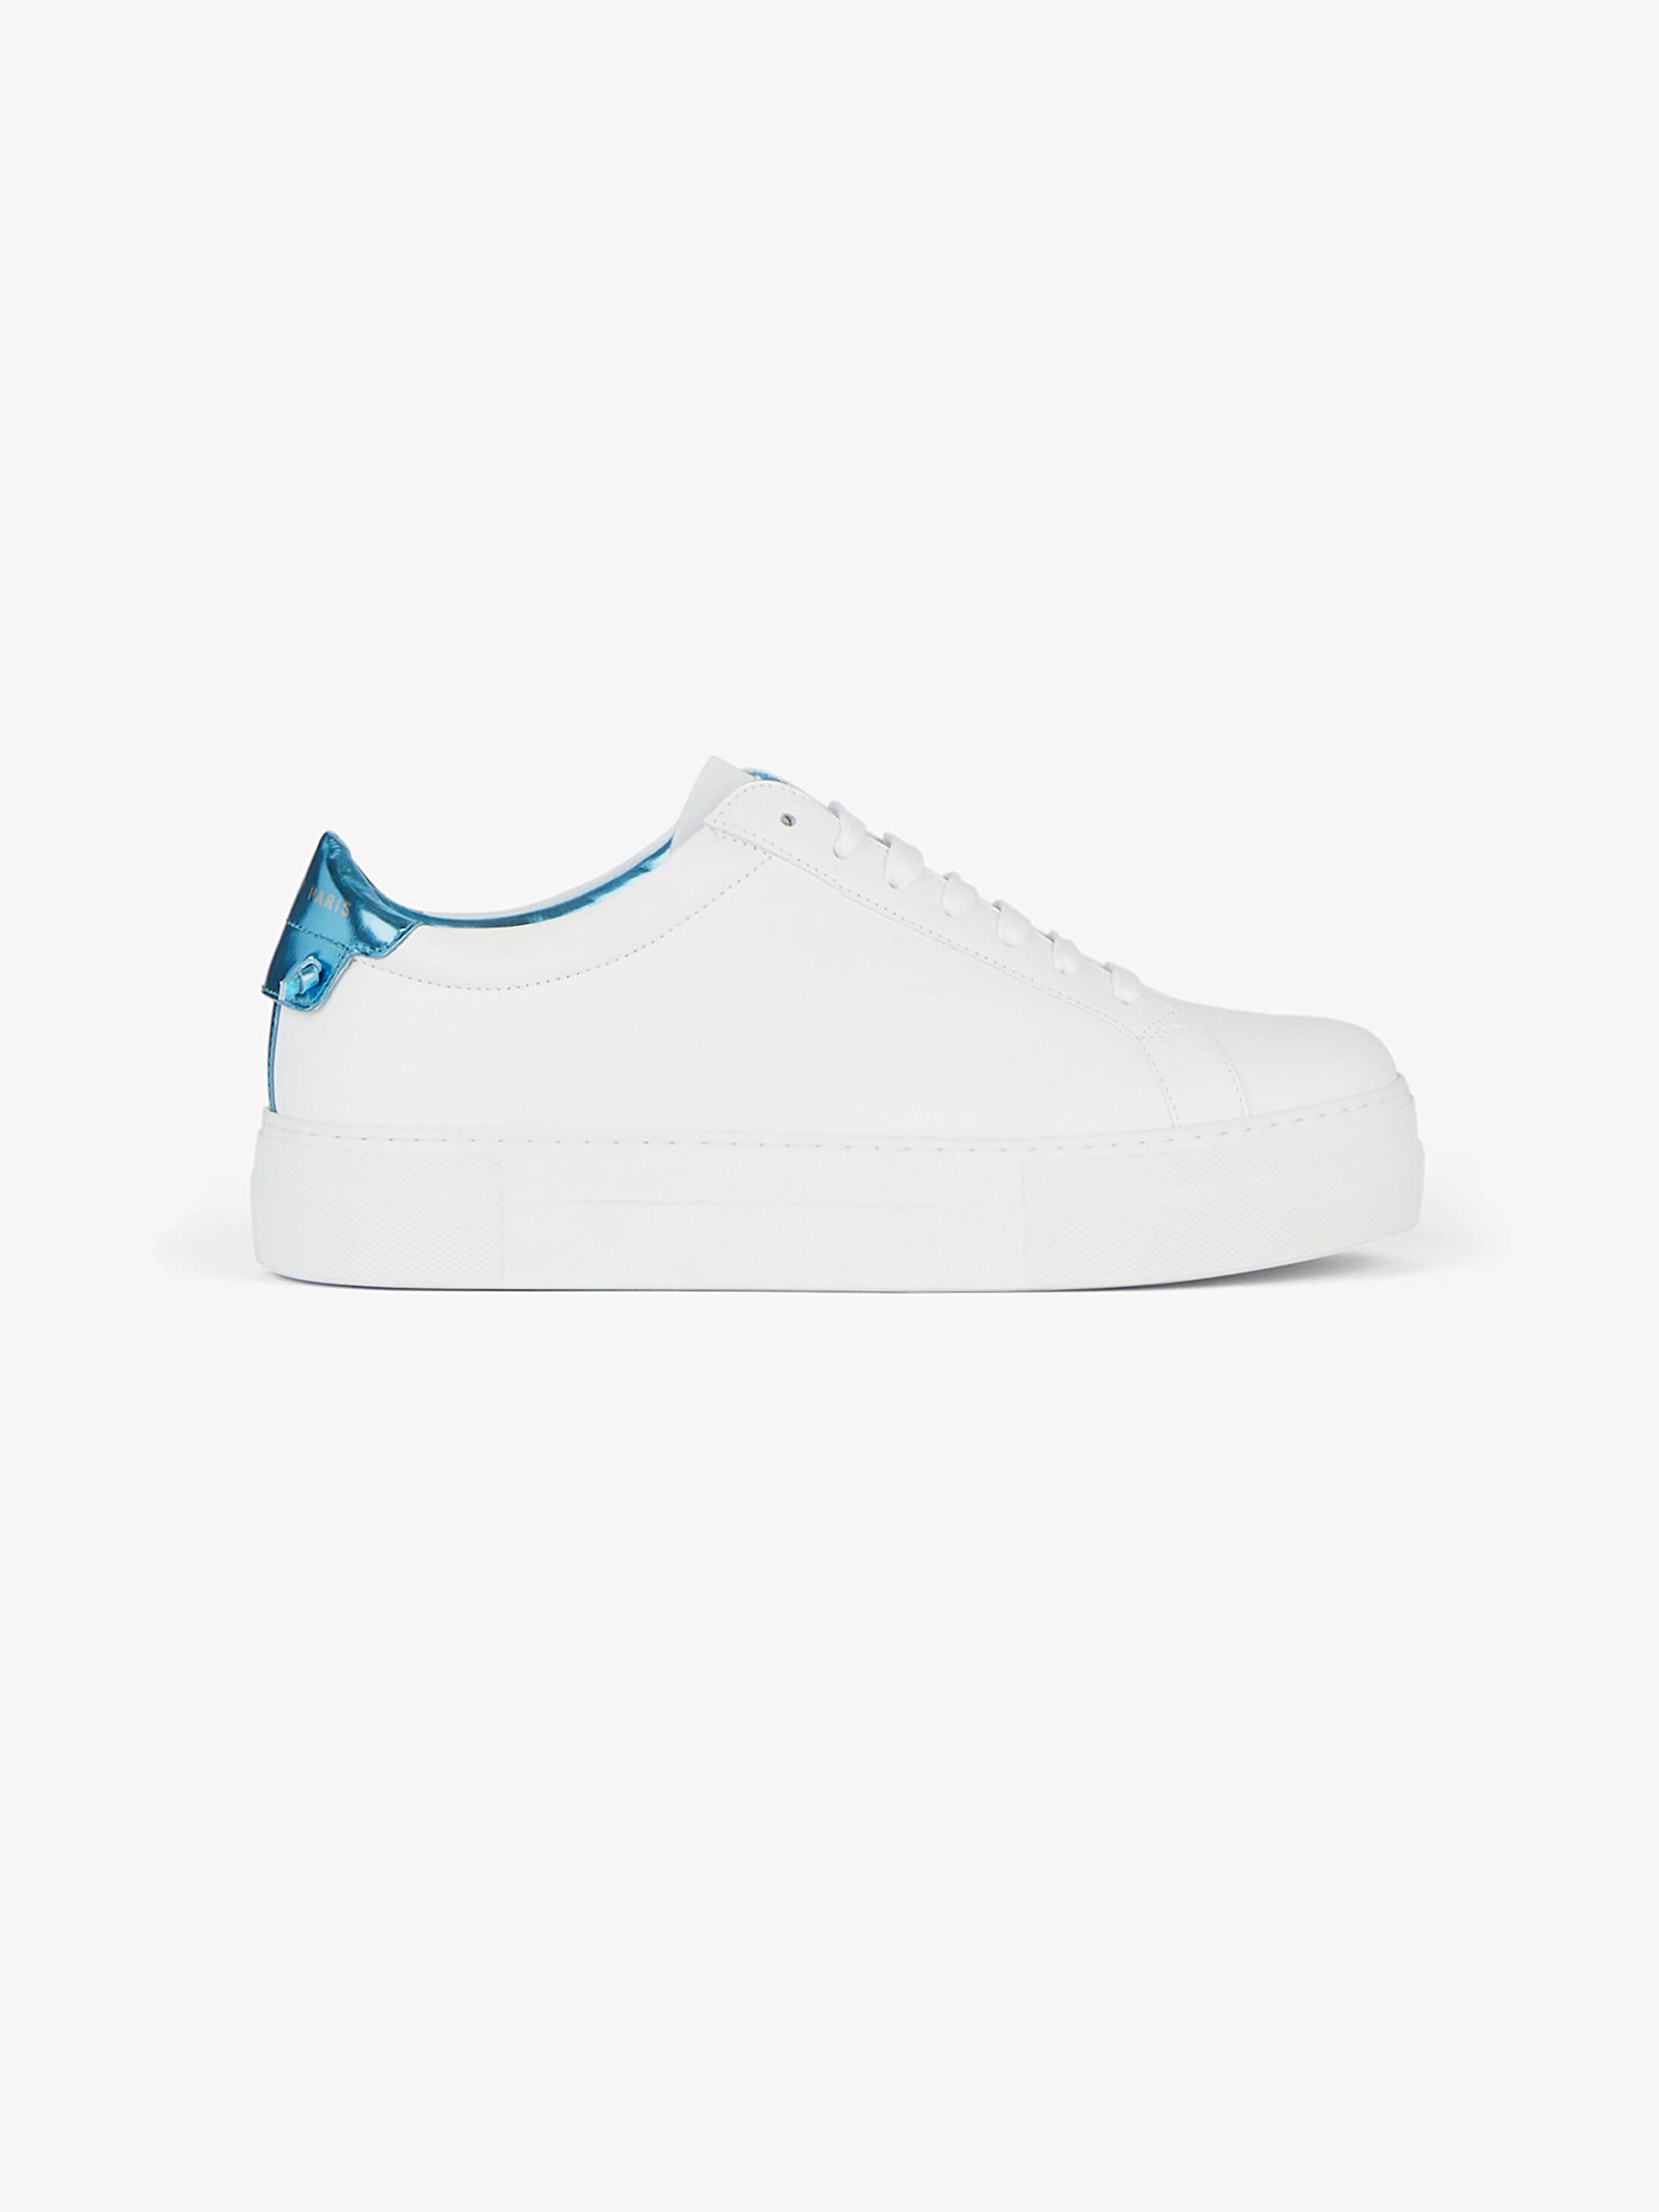 givenchy white sneakers womens